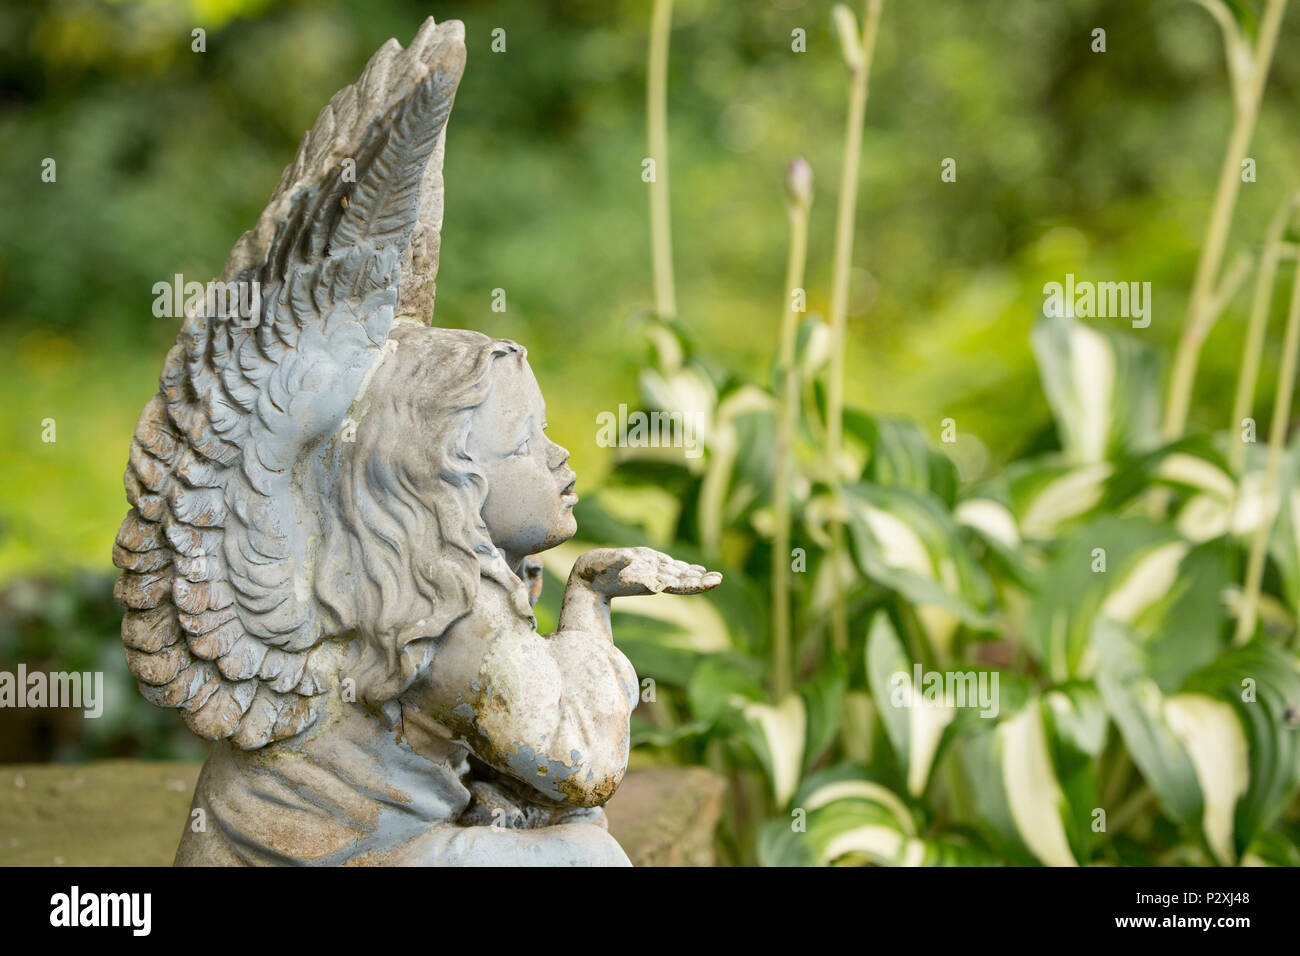 A stone figurine of a winged angel or fairy blowing a kiss and set near a garden pond. Lancashire North West England UK GB Stock Photo